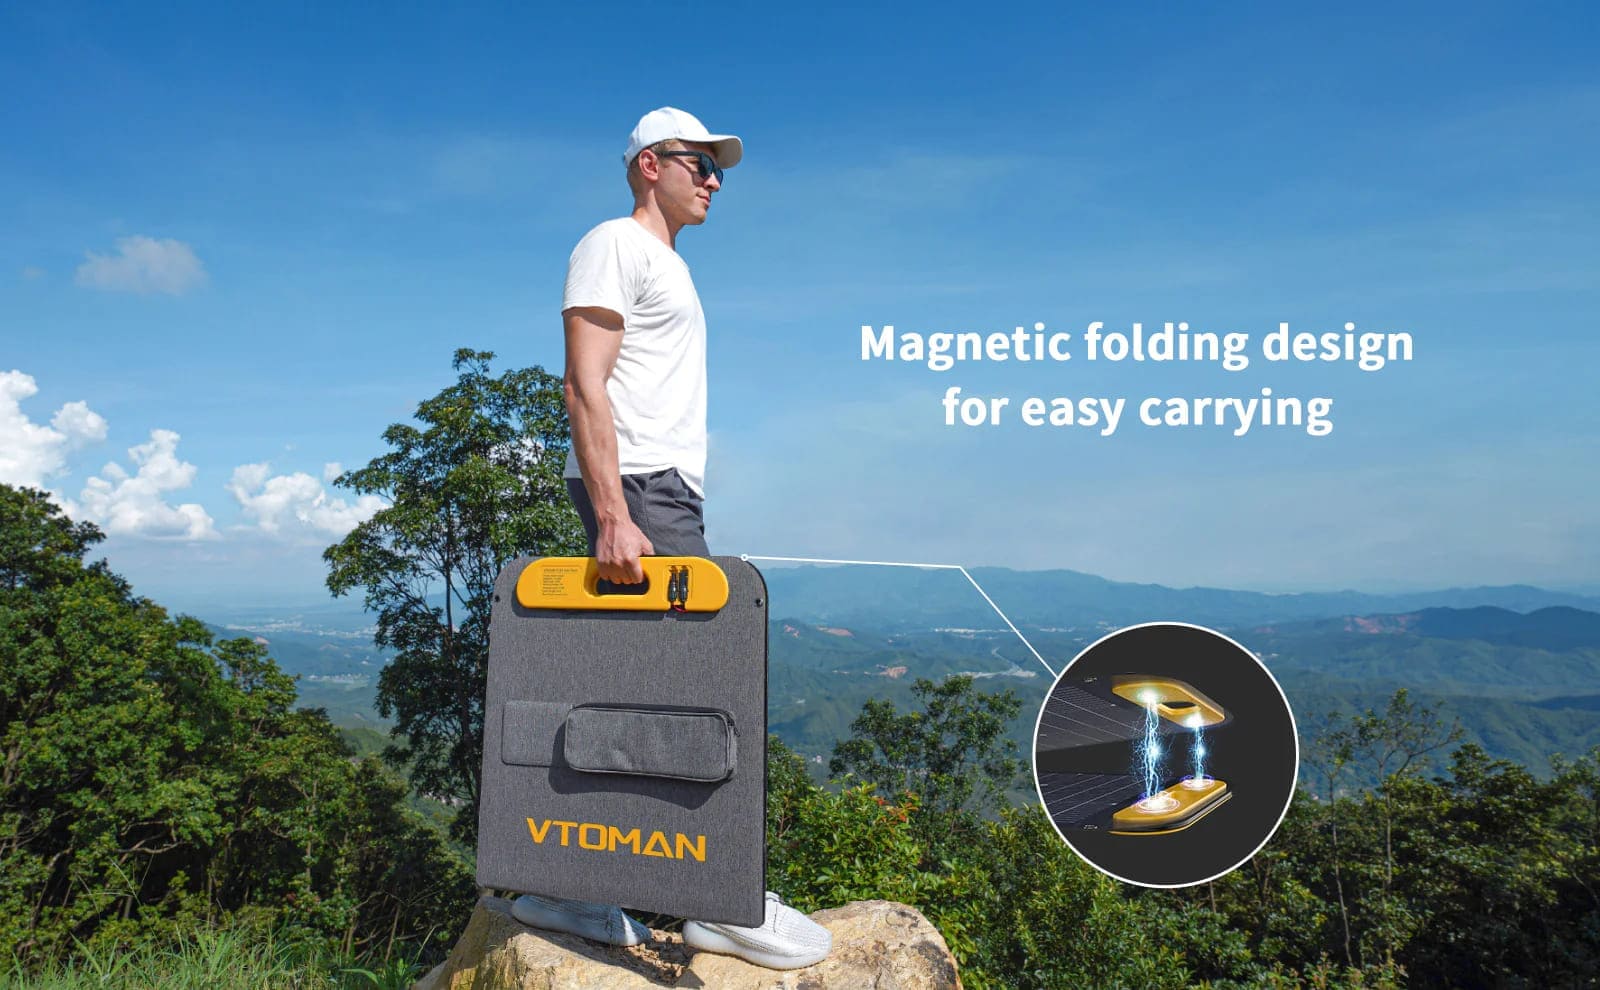 VS220 portable solar panel measures 25.6*23.7*2 inches when folded and weighs 19.2 lbs